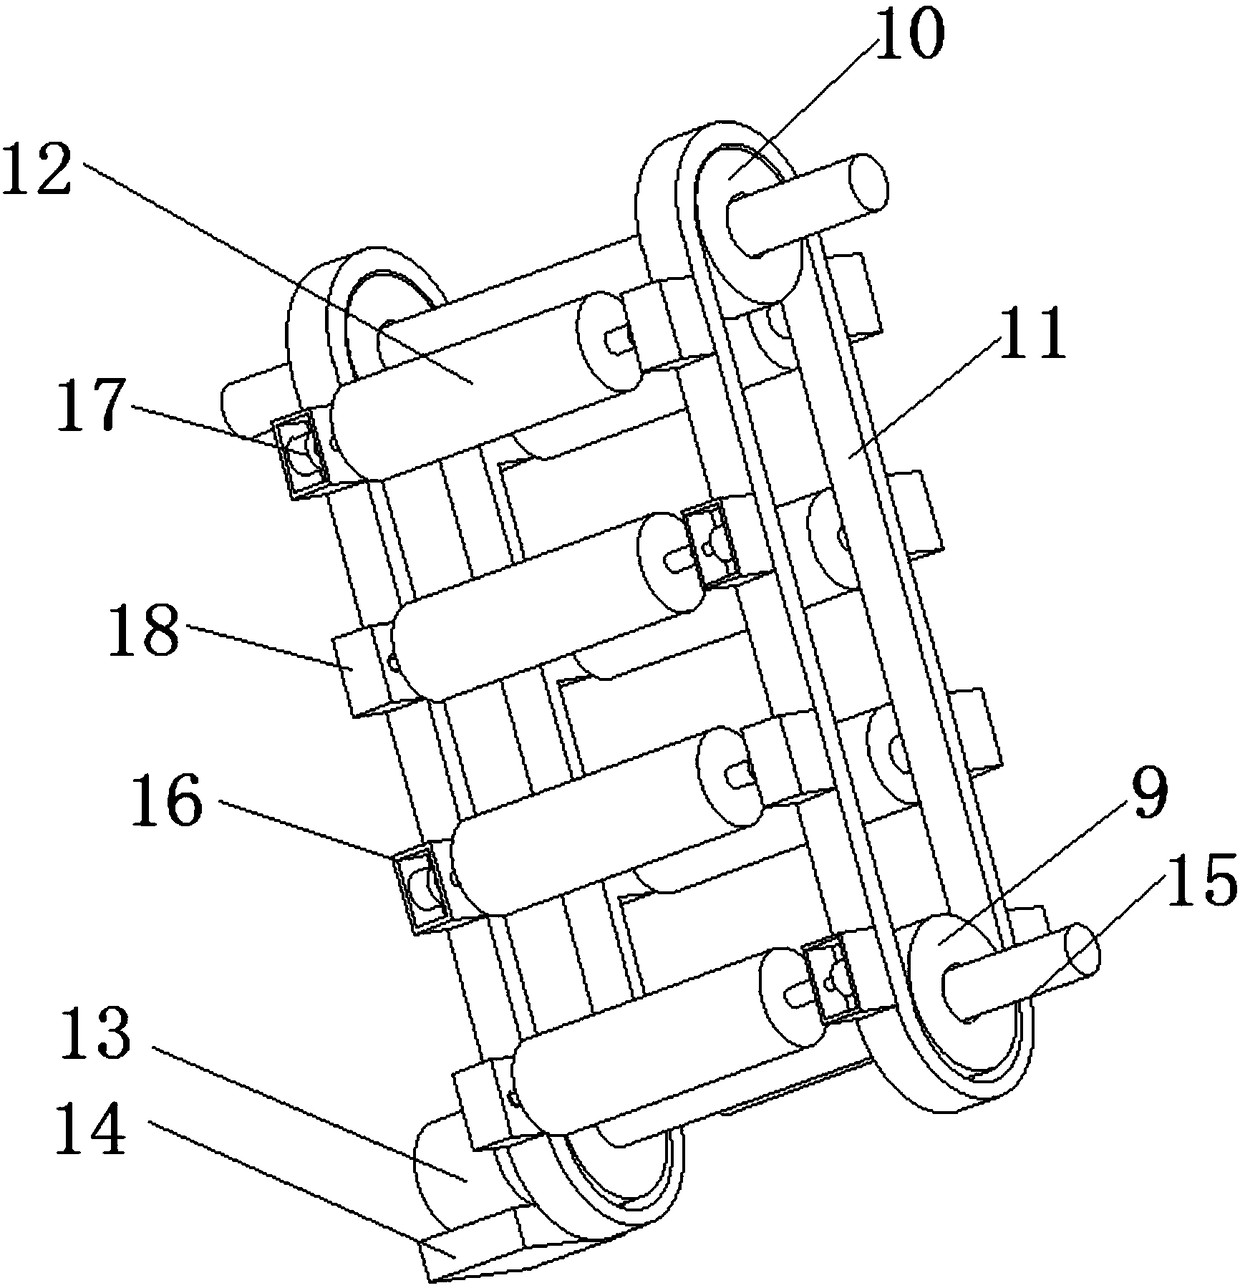 Fabric winding frame device for textile workshop